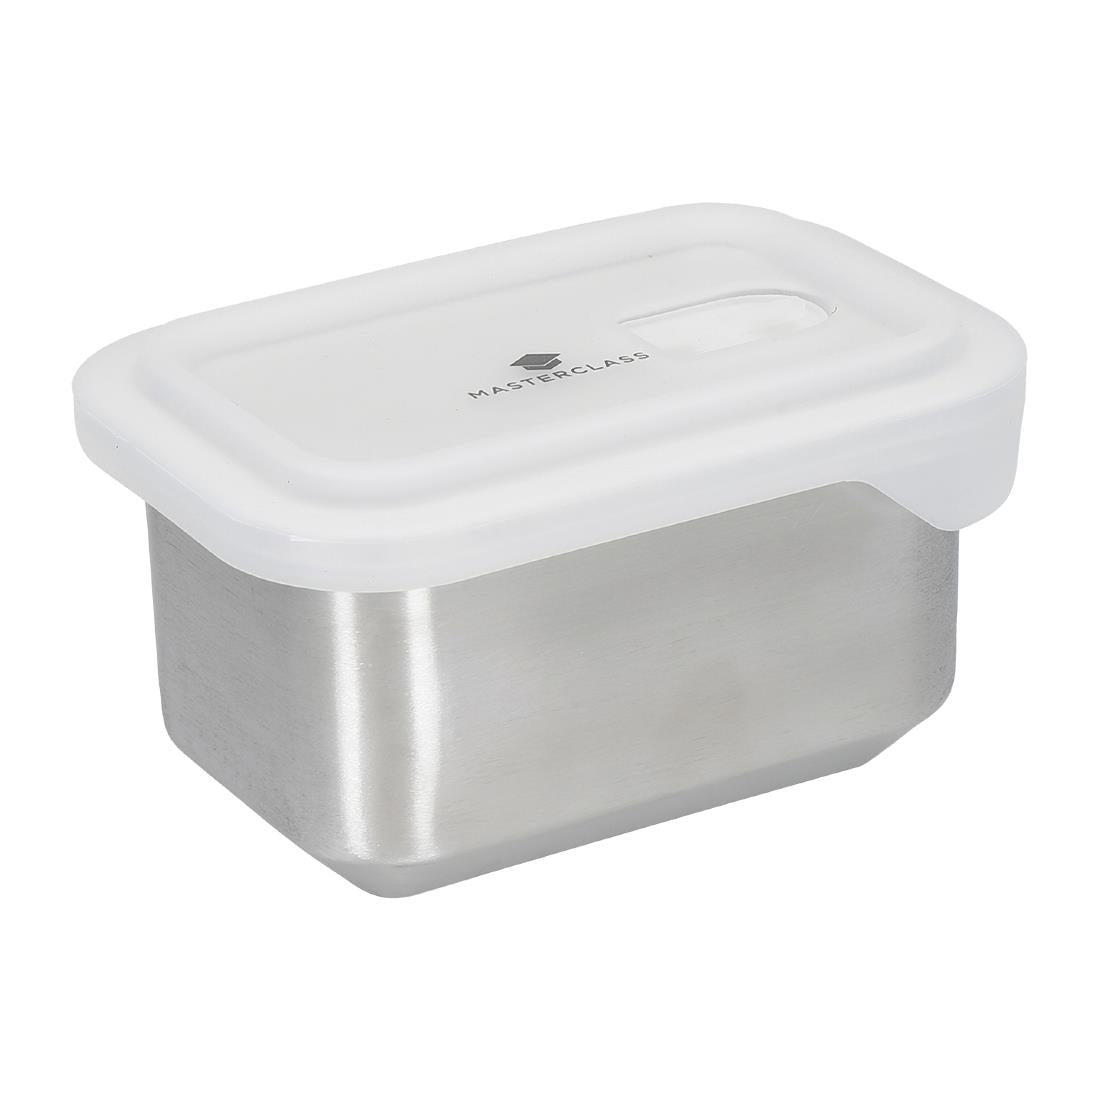 FW784 Masterclass All-in-One Stainless Steel Food Storage Dish 750ml JD Catering Equipment Solutions Ltd